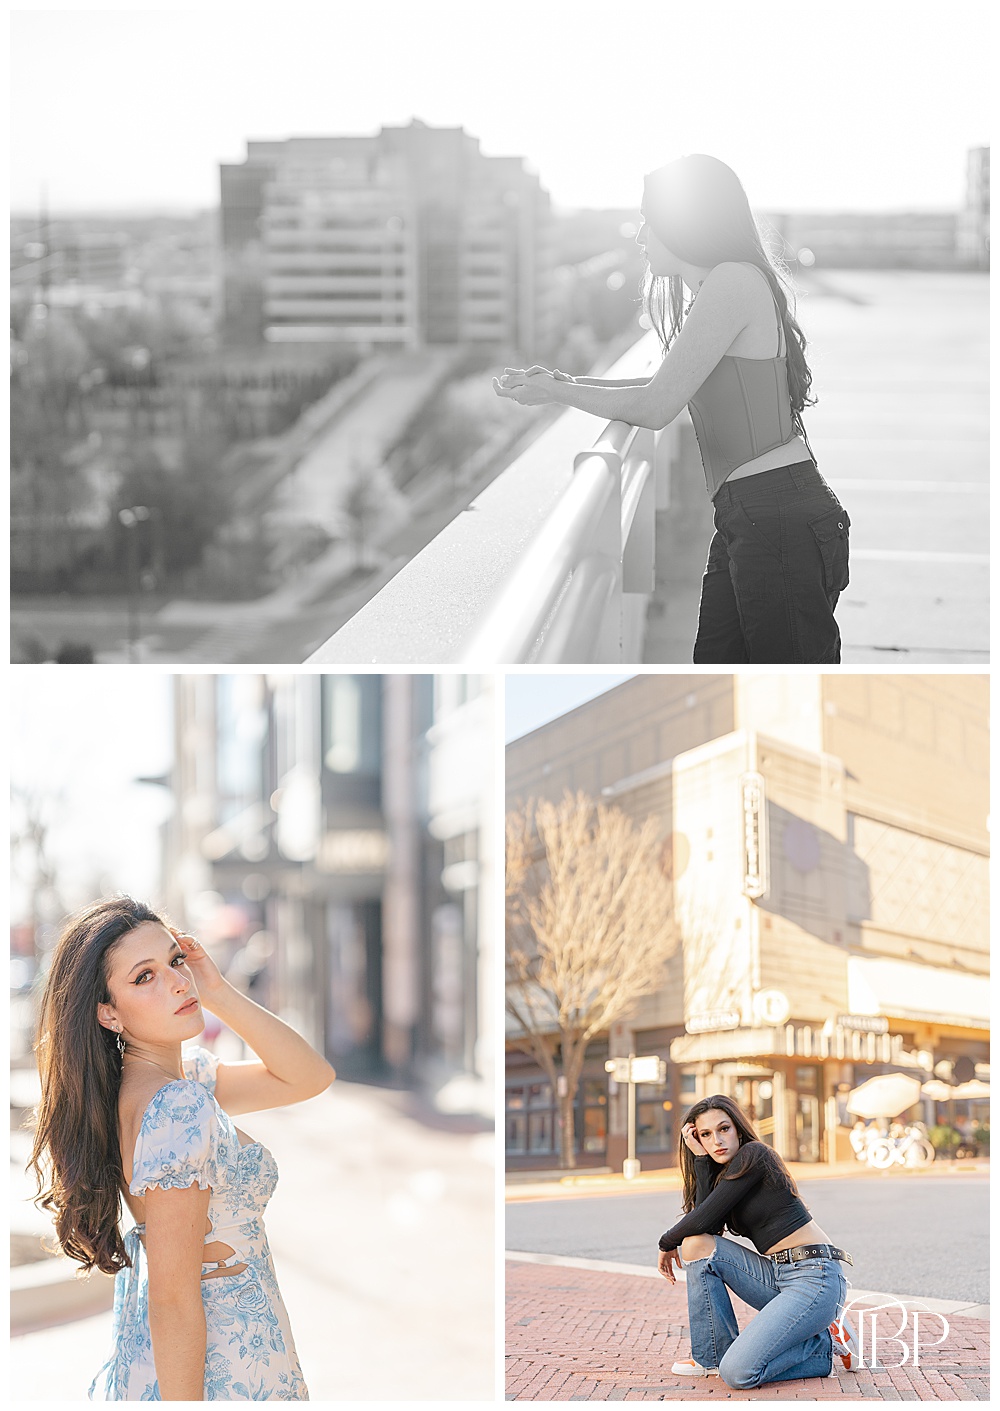 Edgy senior pictures in downtown Reston, VA